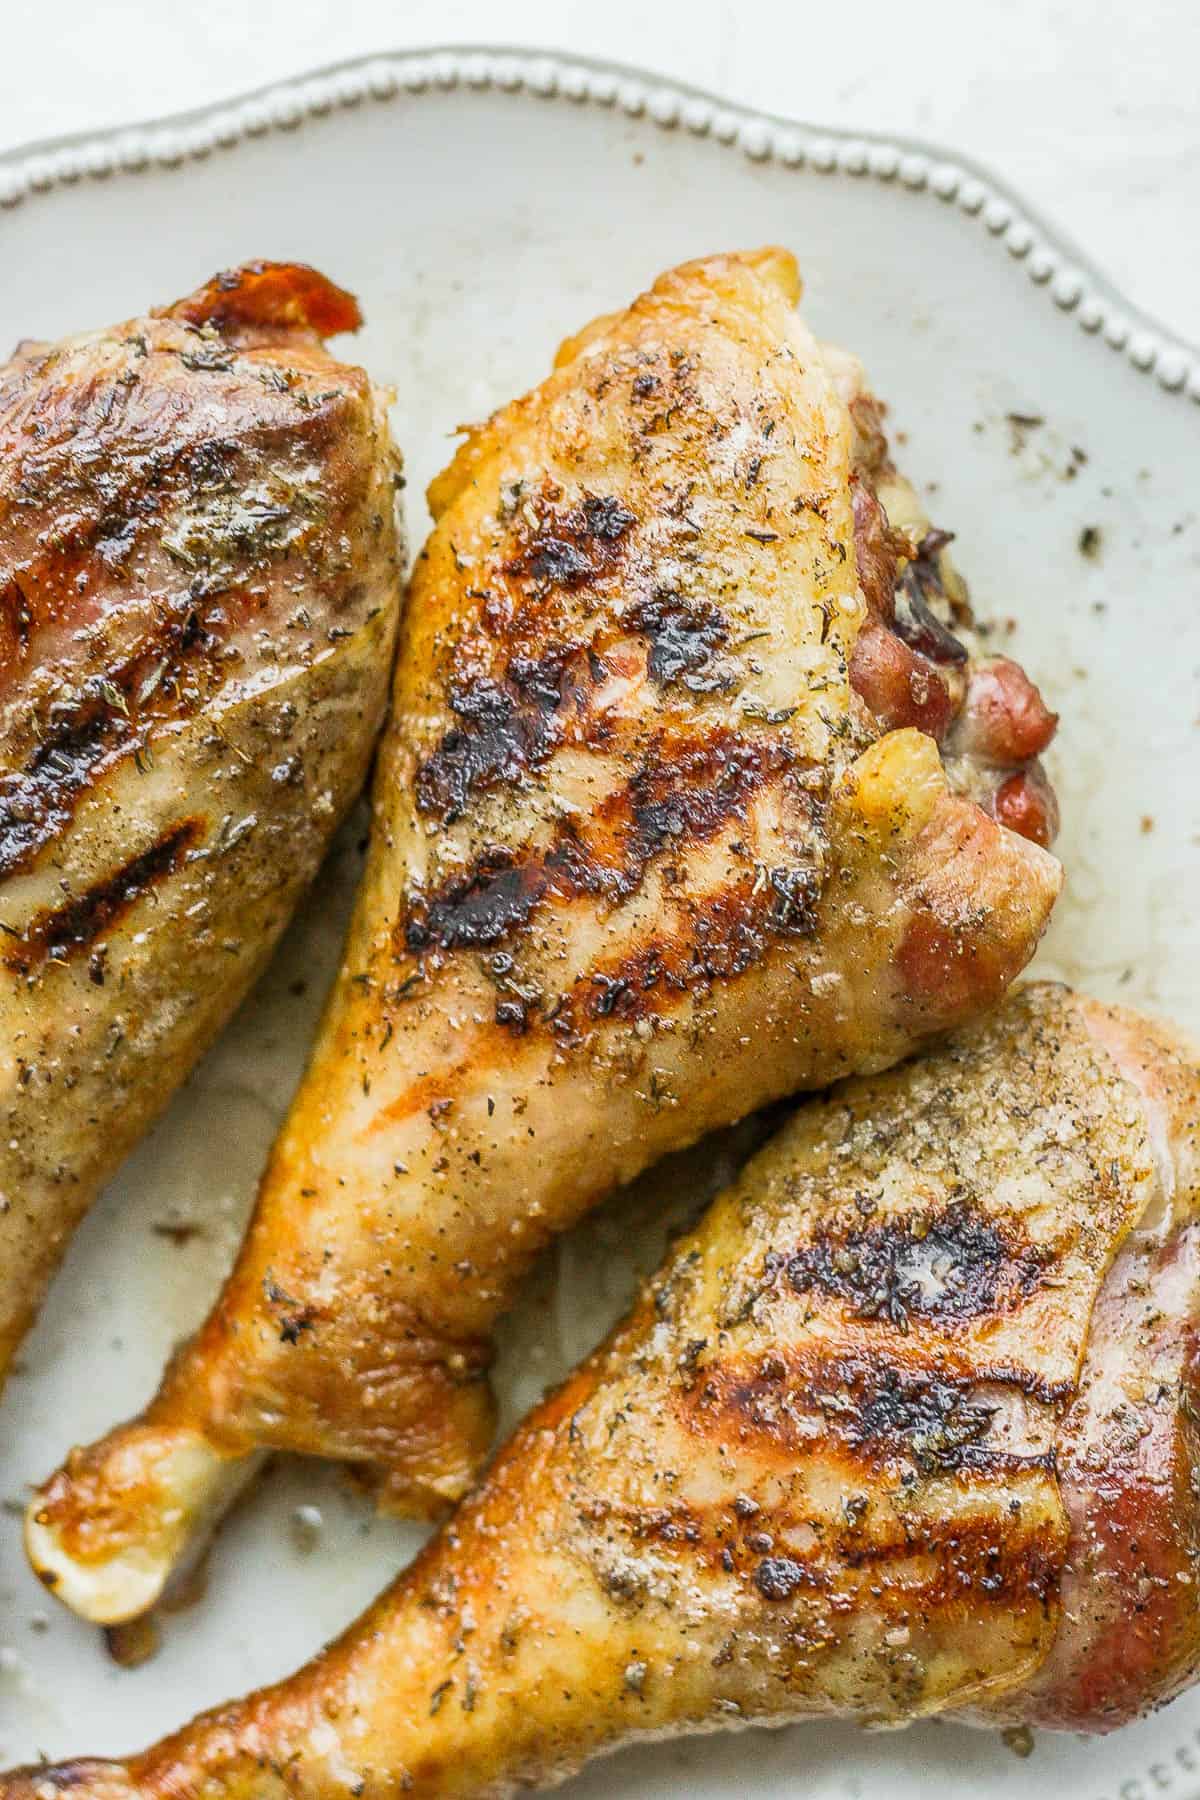 Tutorial on how to cook the best smoked turkey legs.